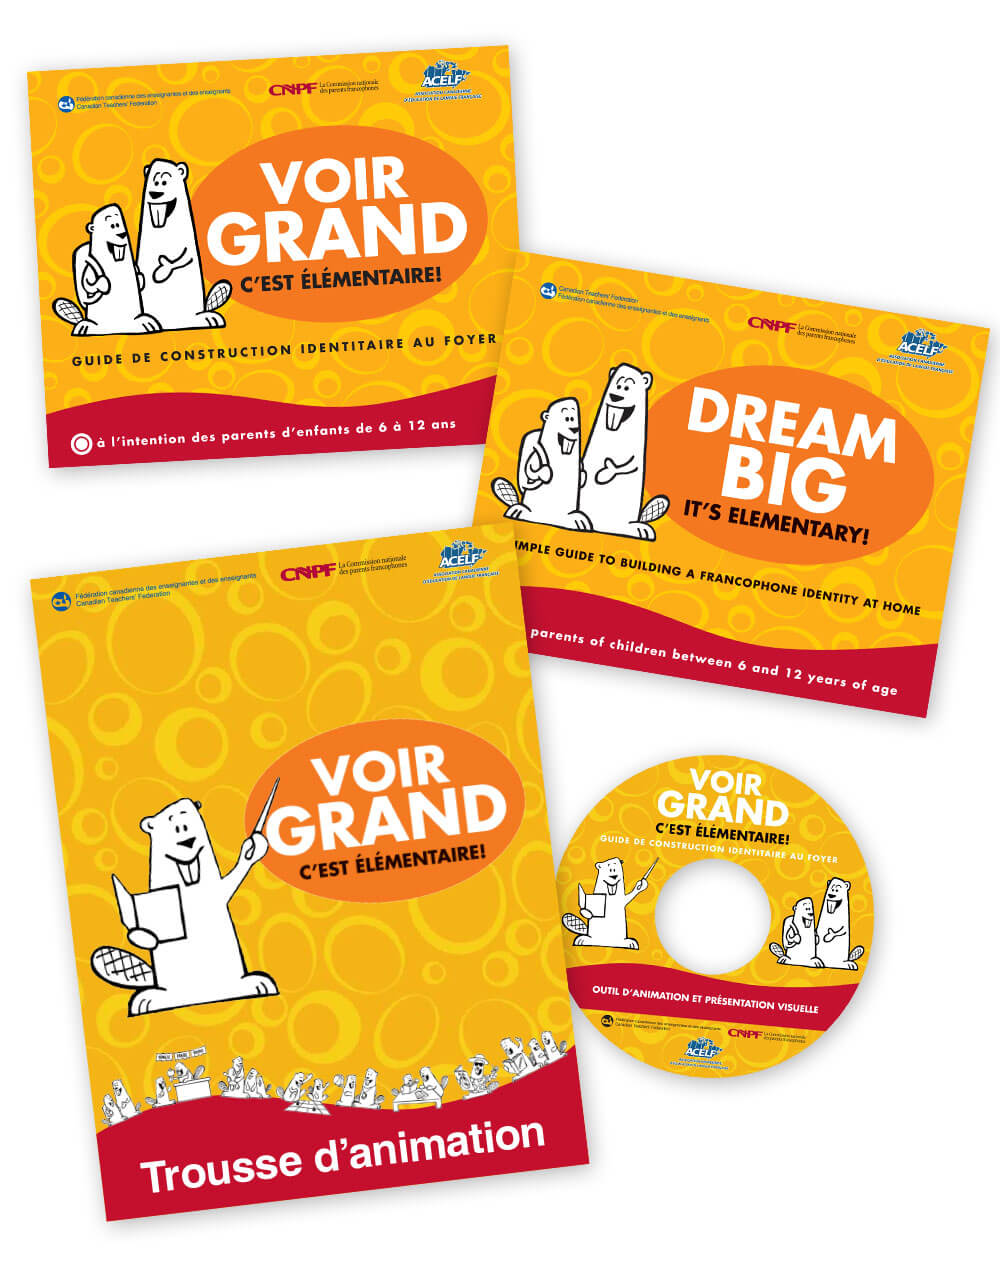 Dream Big, It’s Elementary (6 to 12 Years) – Facilitator’s Kit (in French only)